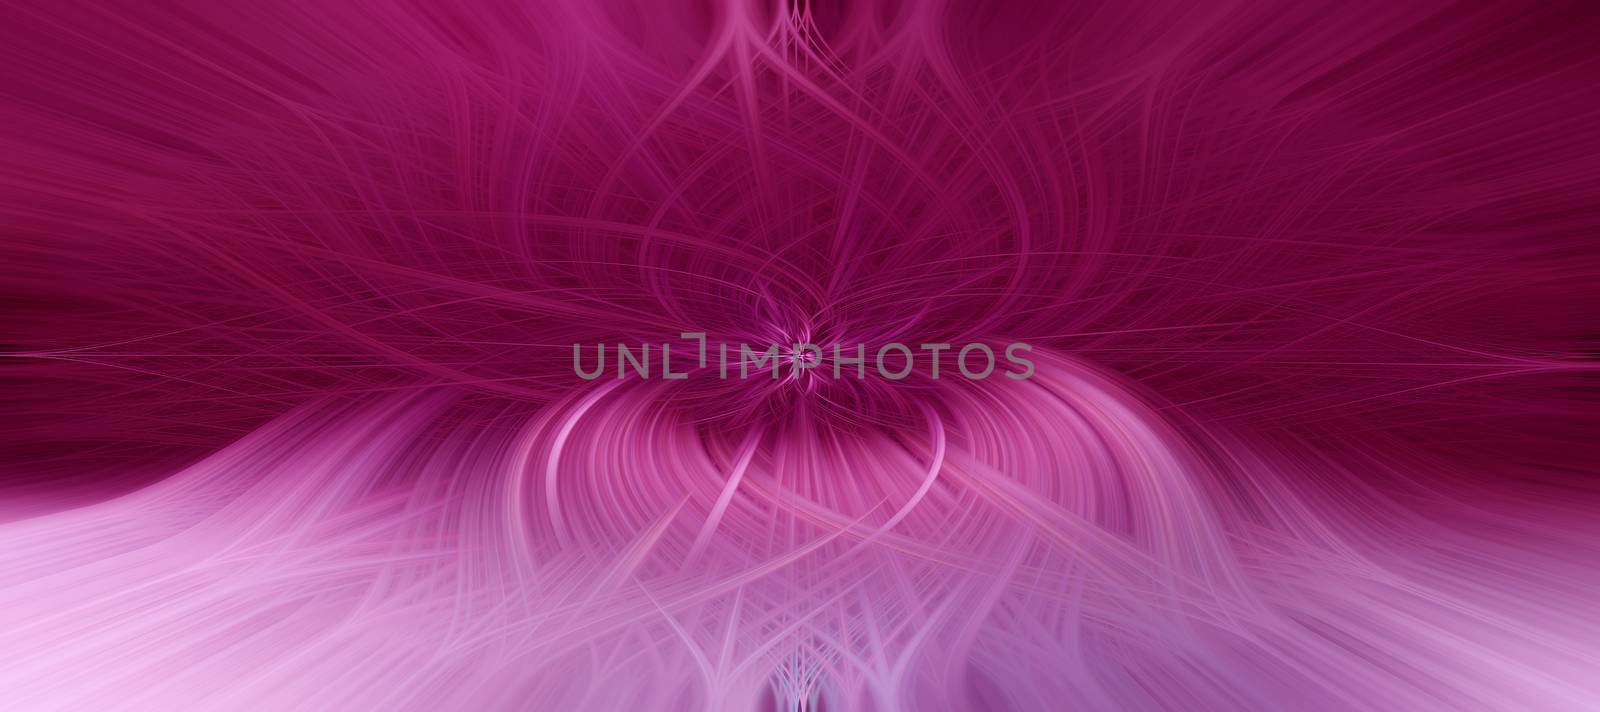 Beautiful abstract intertwined 3d fibers forming a shape of sparkle, flame, flower, interlinked hearts. Pink and purple colors. Illustration.